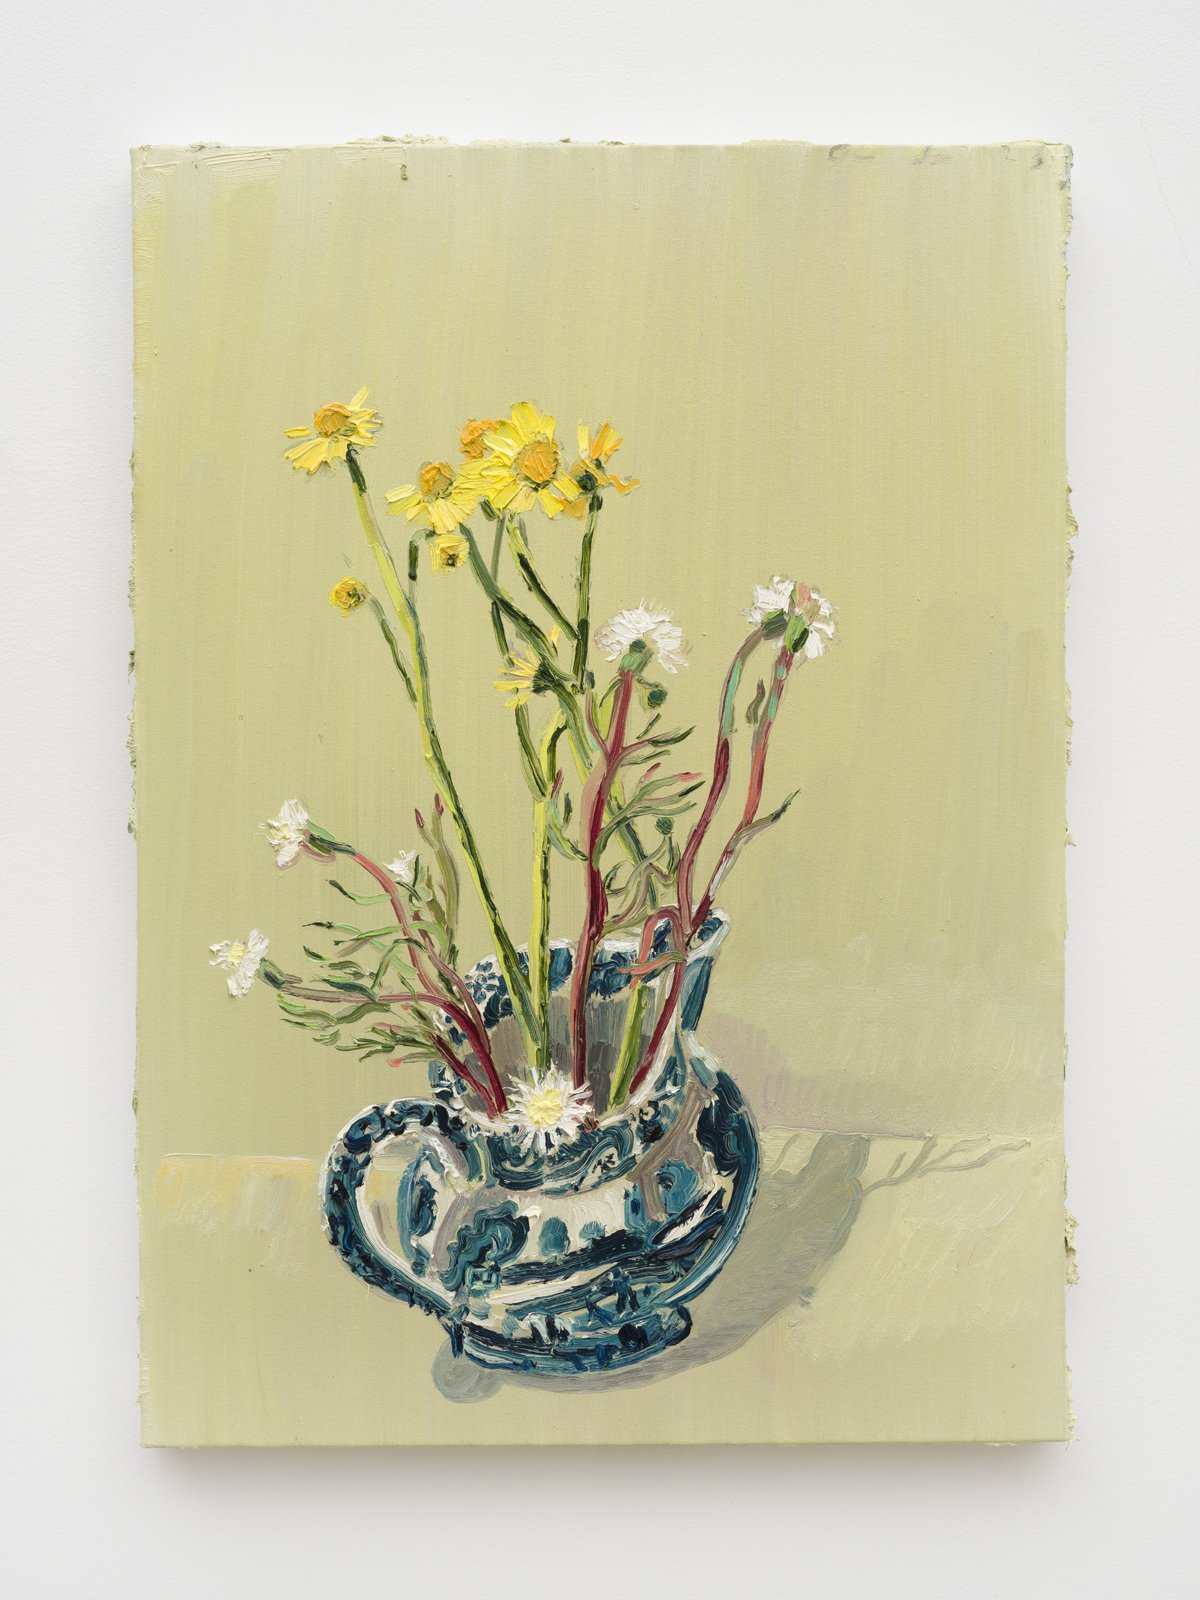  Allison Schulnik  Mum’s Pot with Wildflowers (Brittlebrush and Pincushion), 2023  Oil on canvas stretched over board  28 x 20 in. 